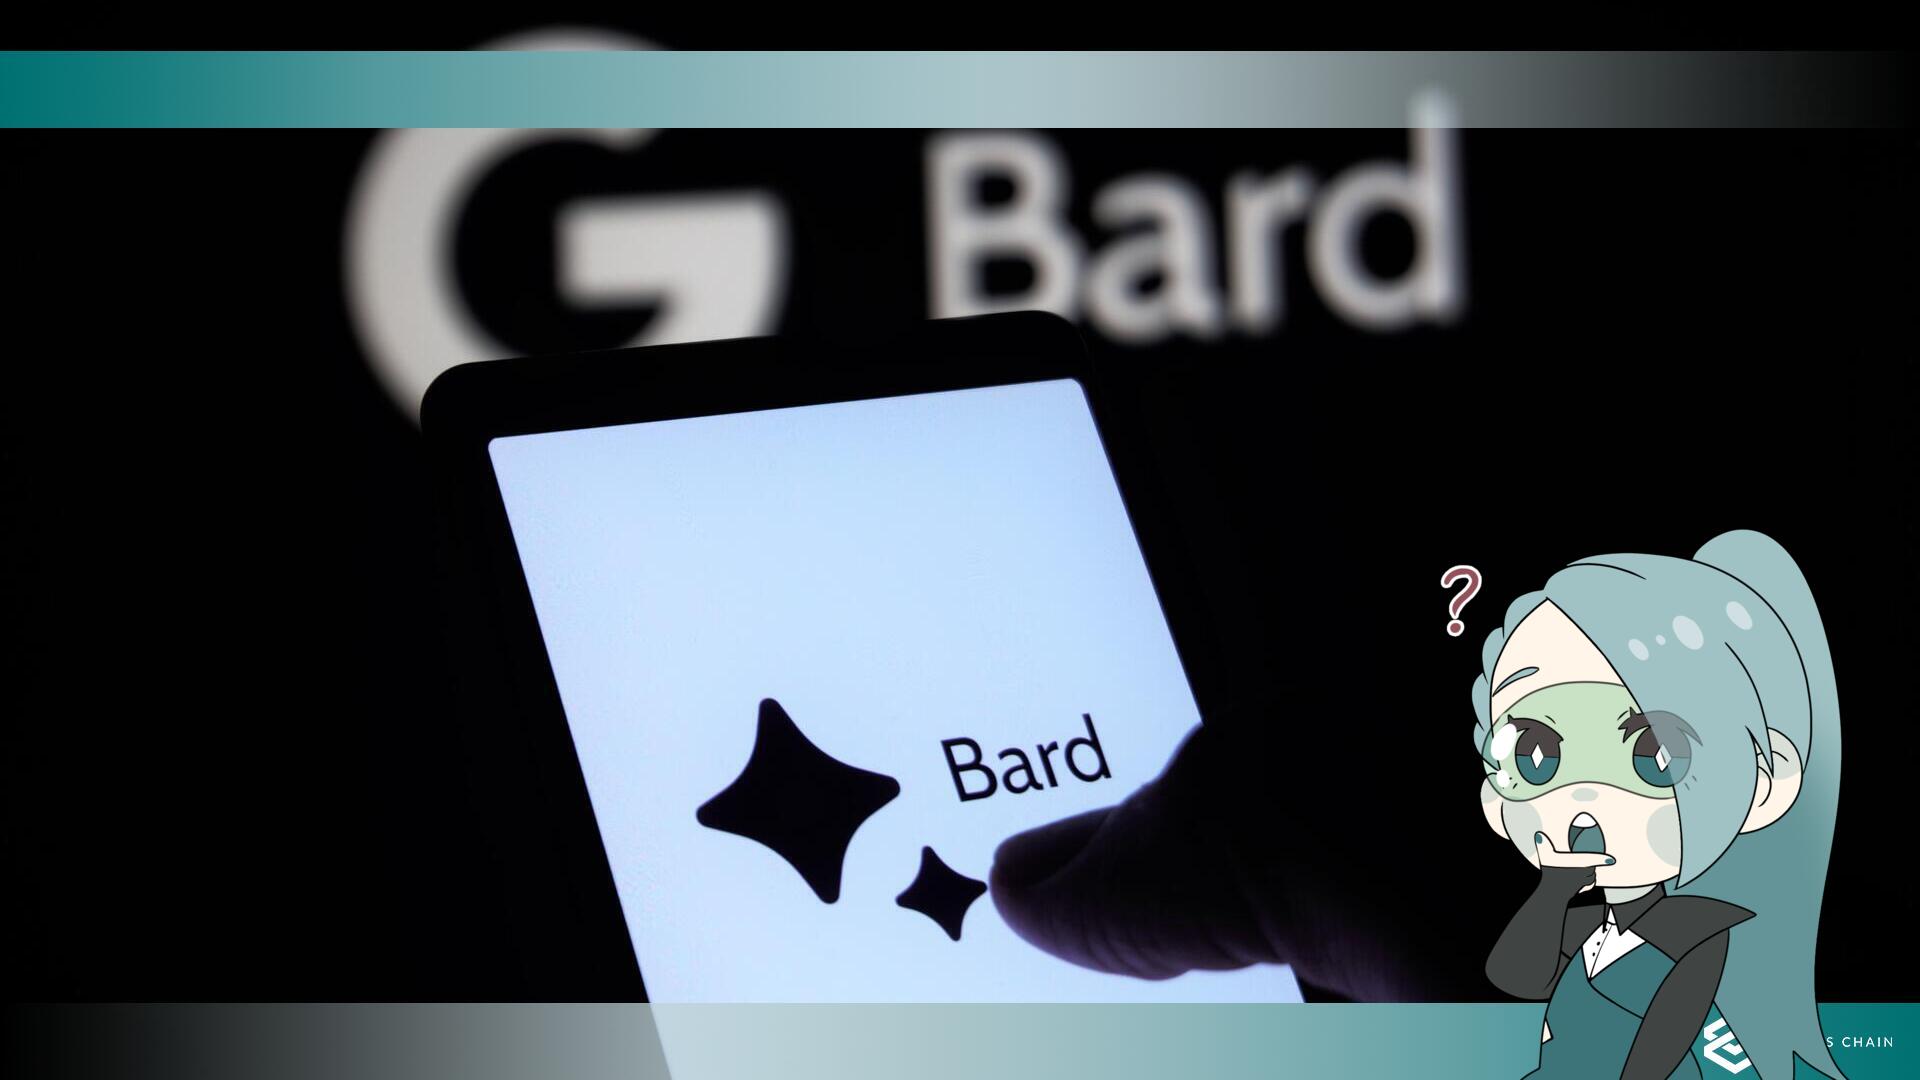  Google rolls out a major expansion of its Bard AI chatbot